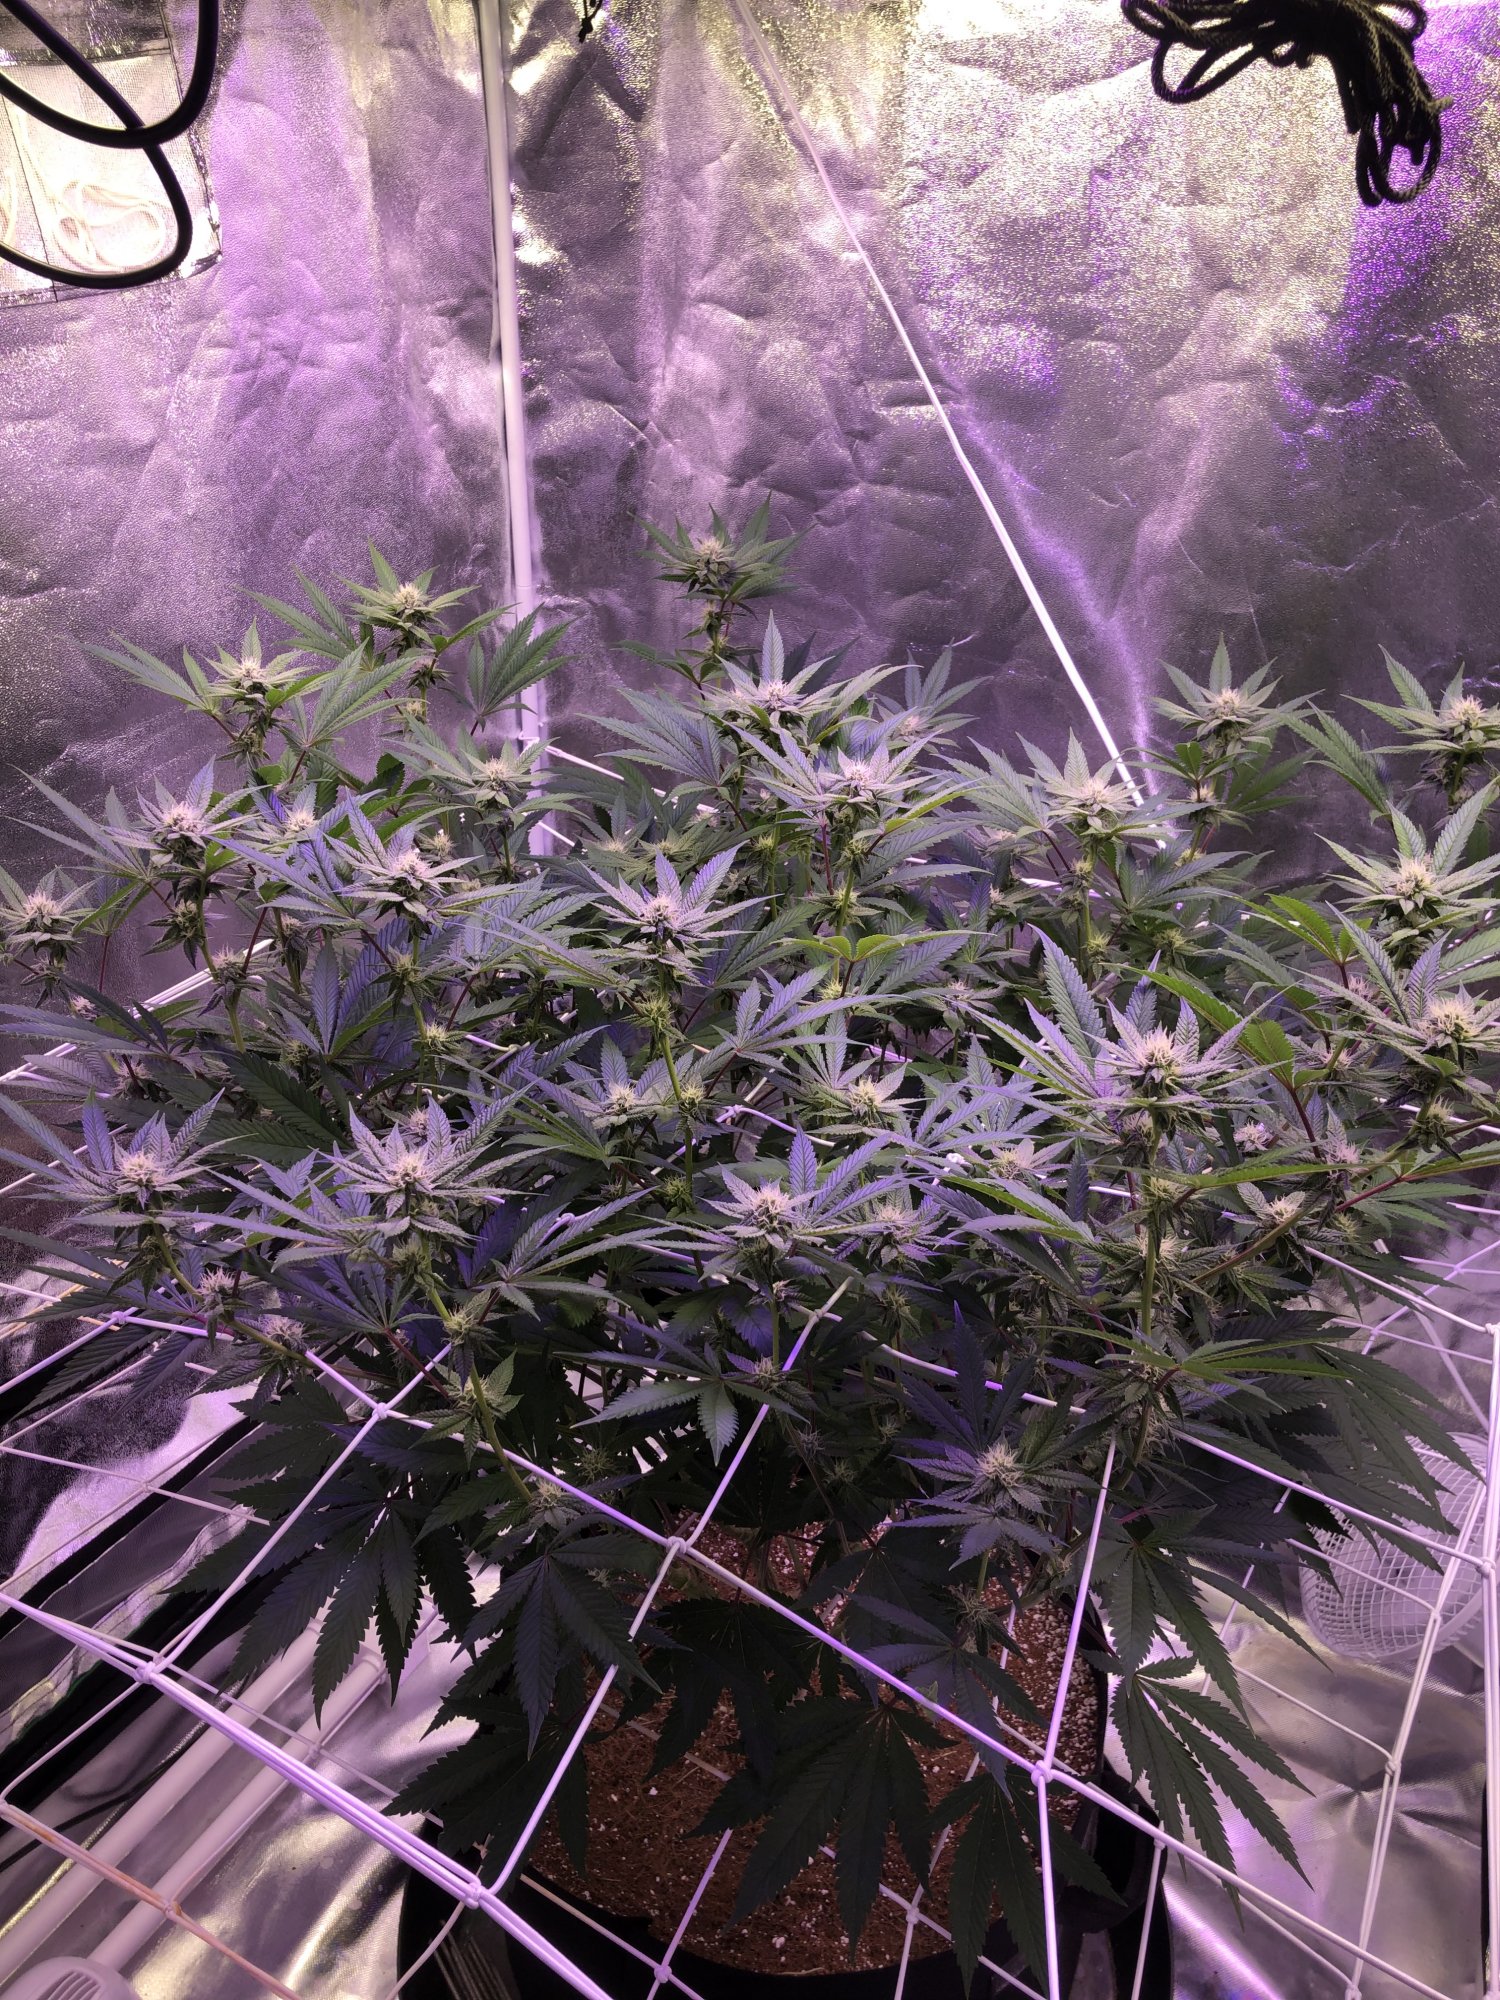 First indoor grow in coco hows it looking 6